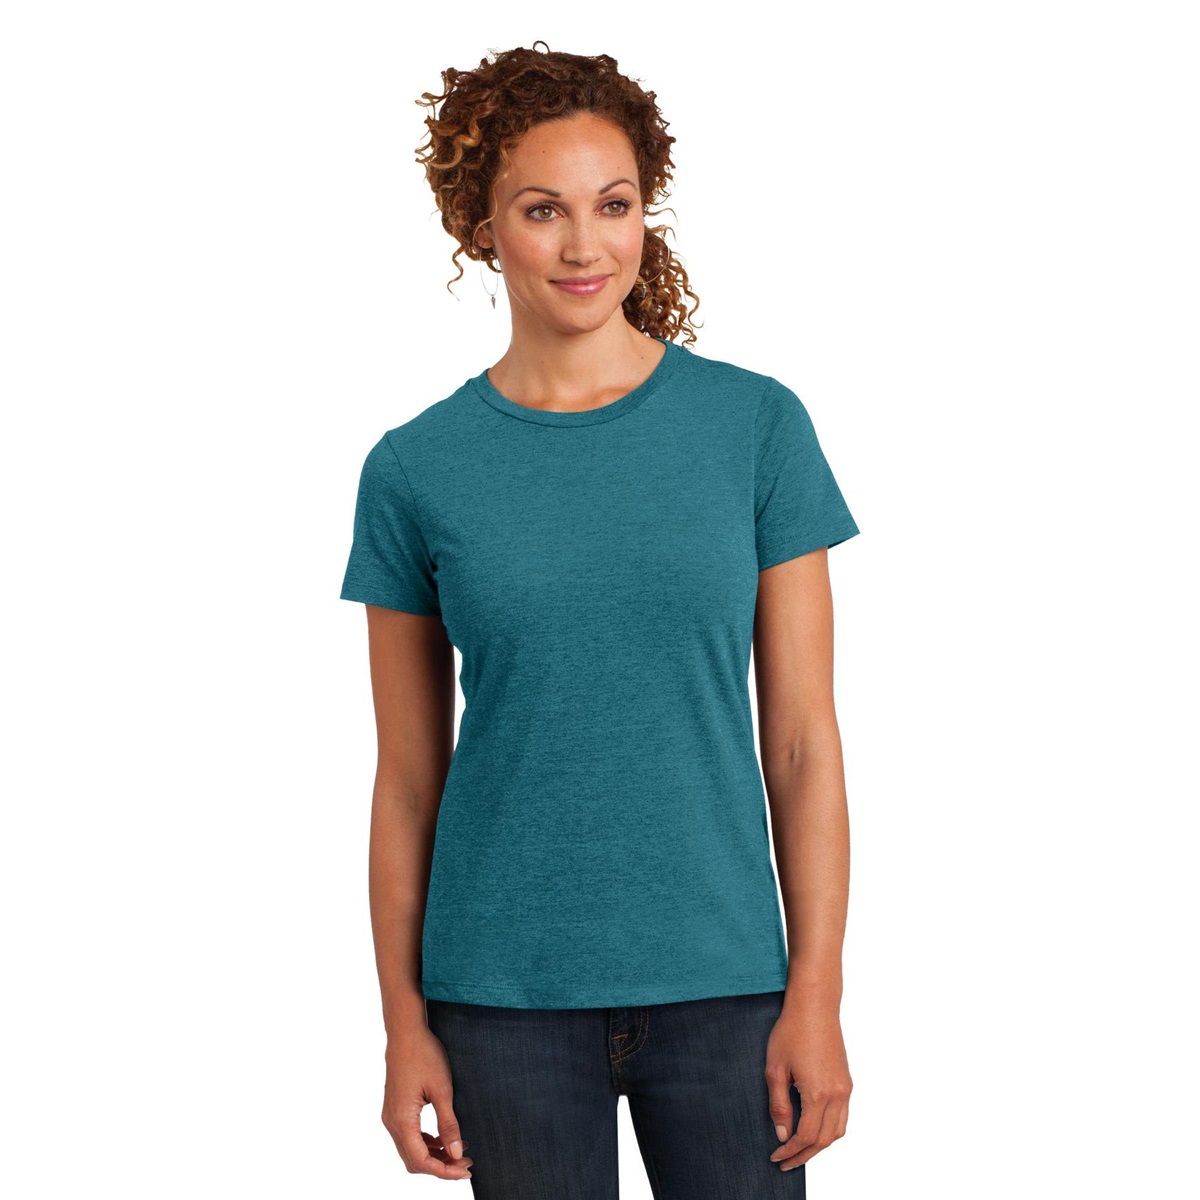 District Made DM108L Ladies Perfect Blend Crew Tee - Heathered Teal ...